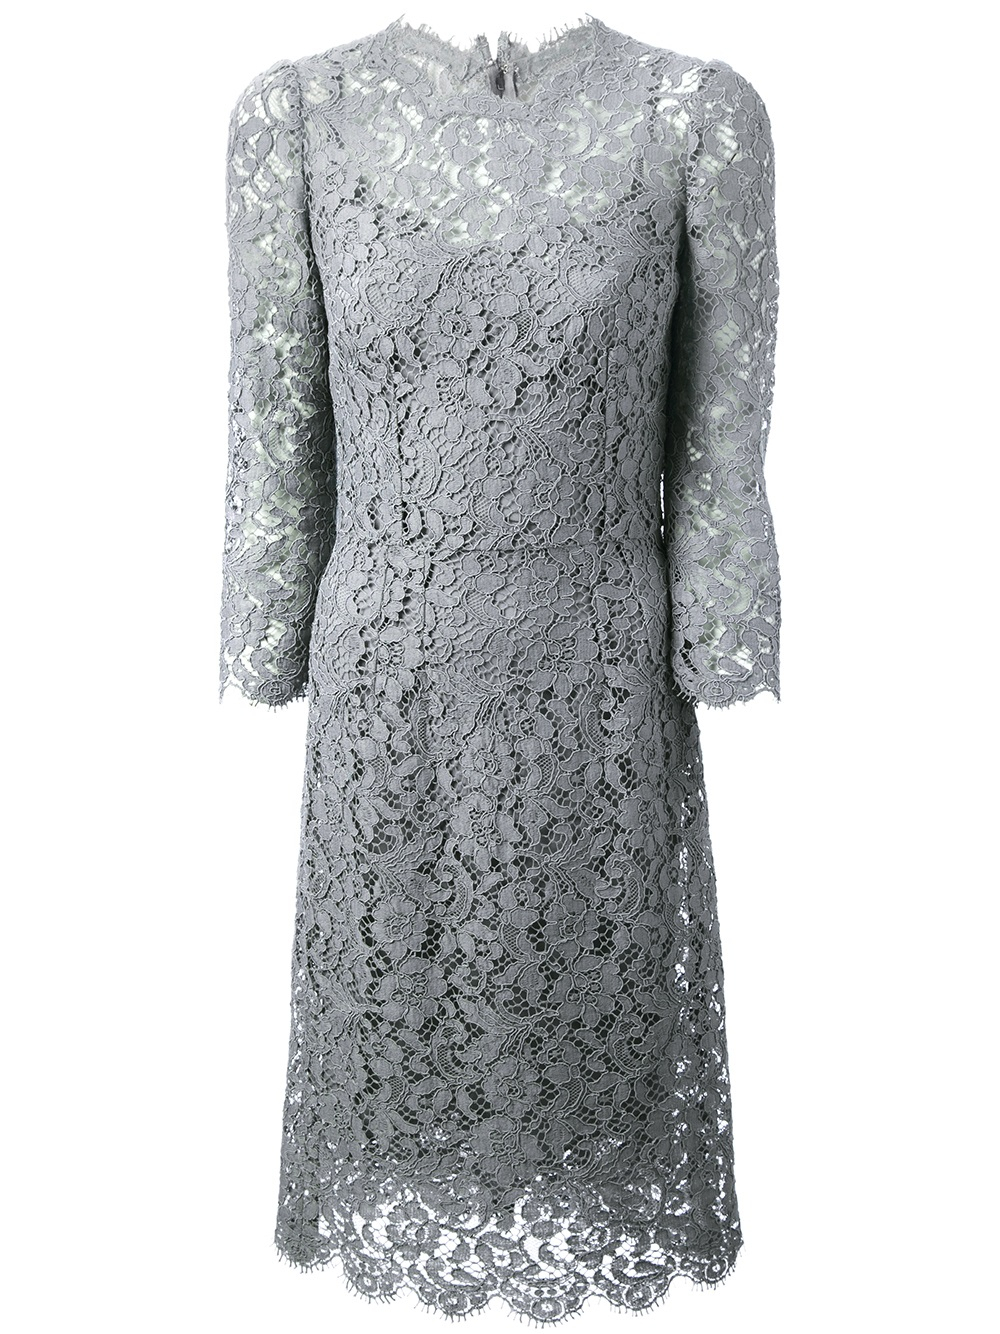 Dolce & Gabbana Floral Lace Dress in Grey (Gray) - Lyst